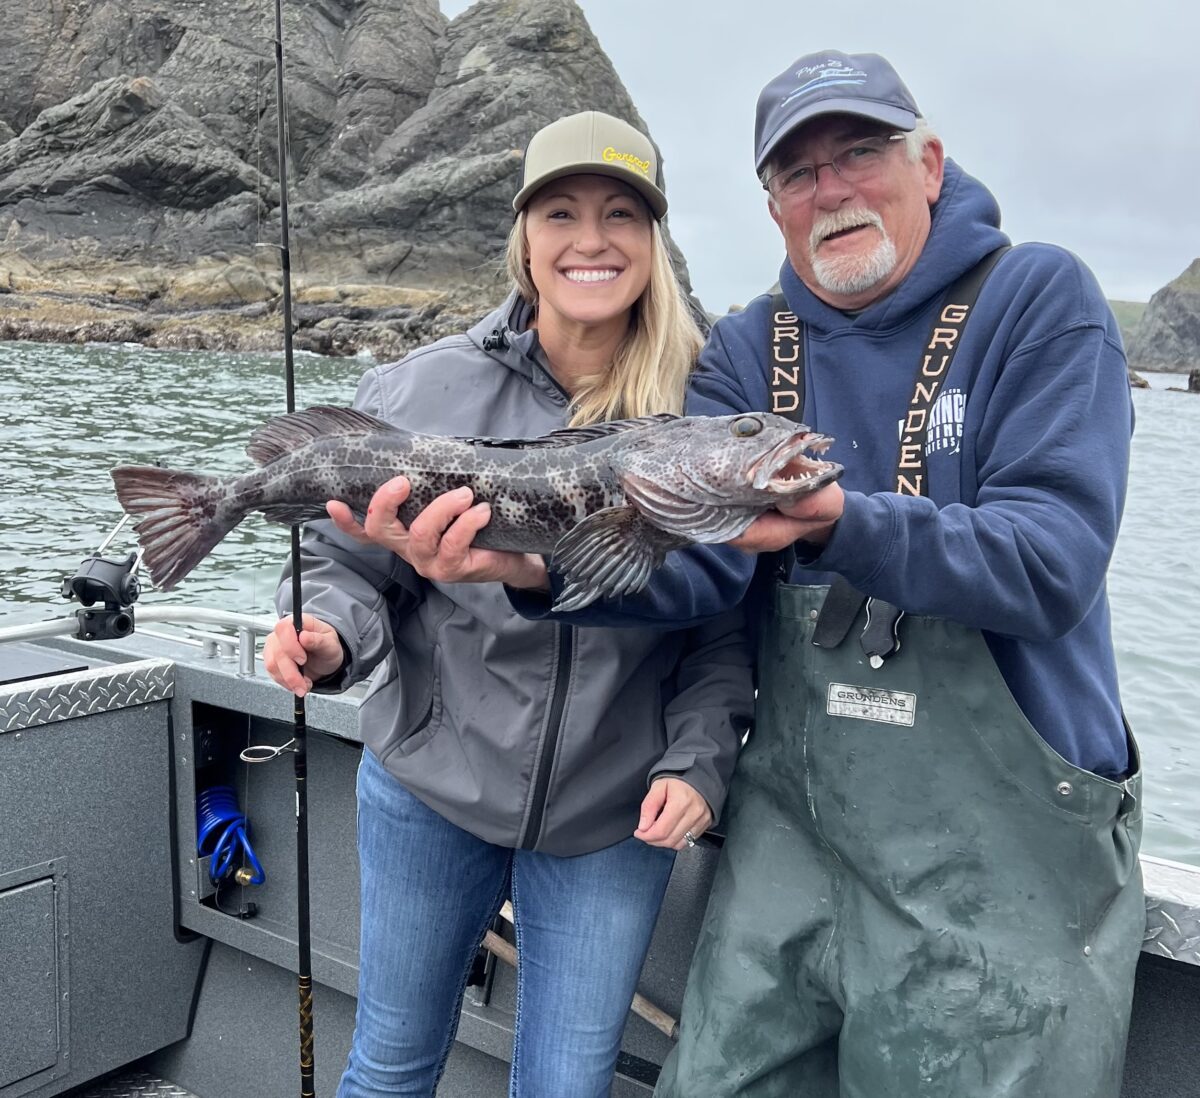 Vancouver Salmon Fishing Report: December 20, 2019 - Vancouver